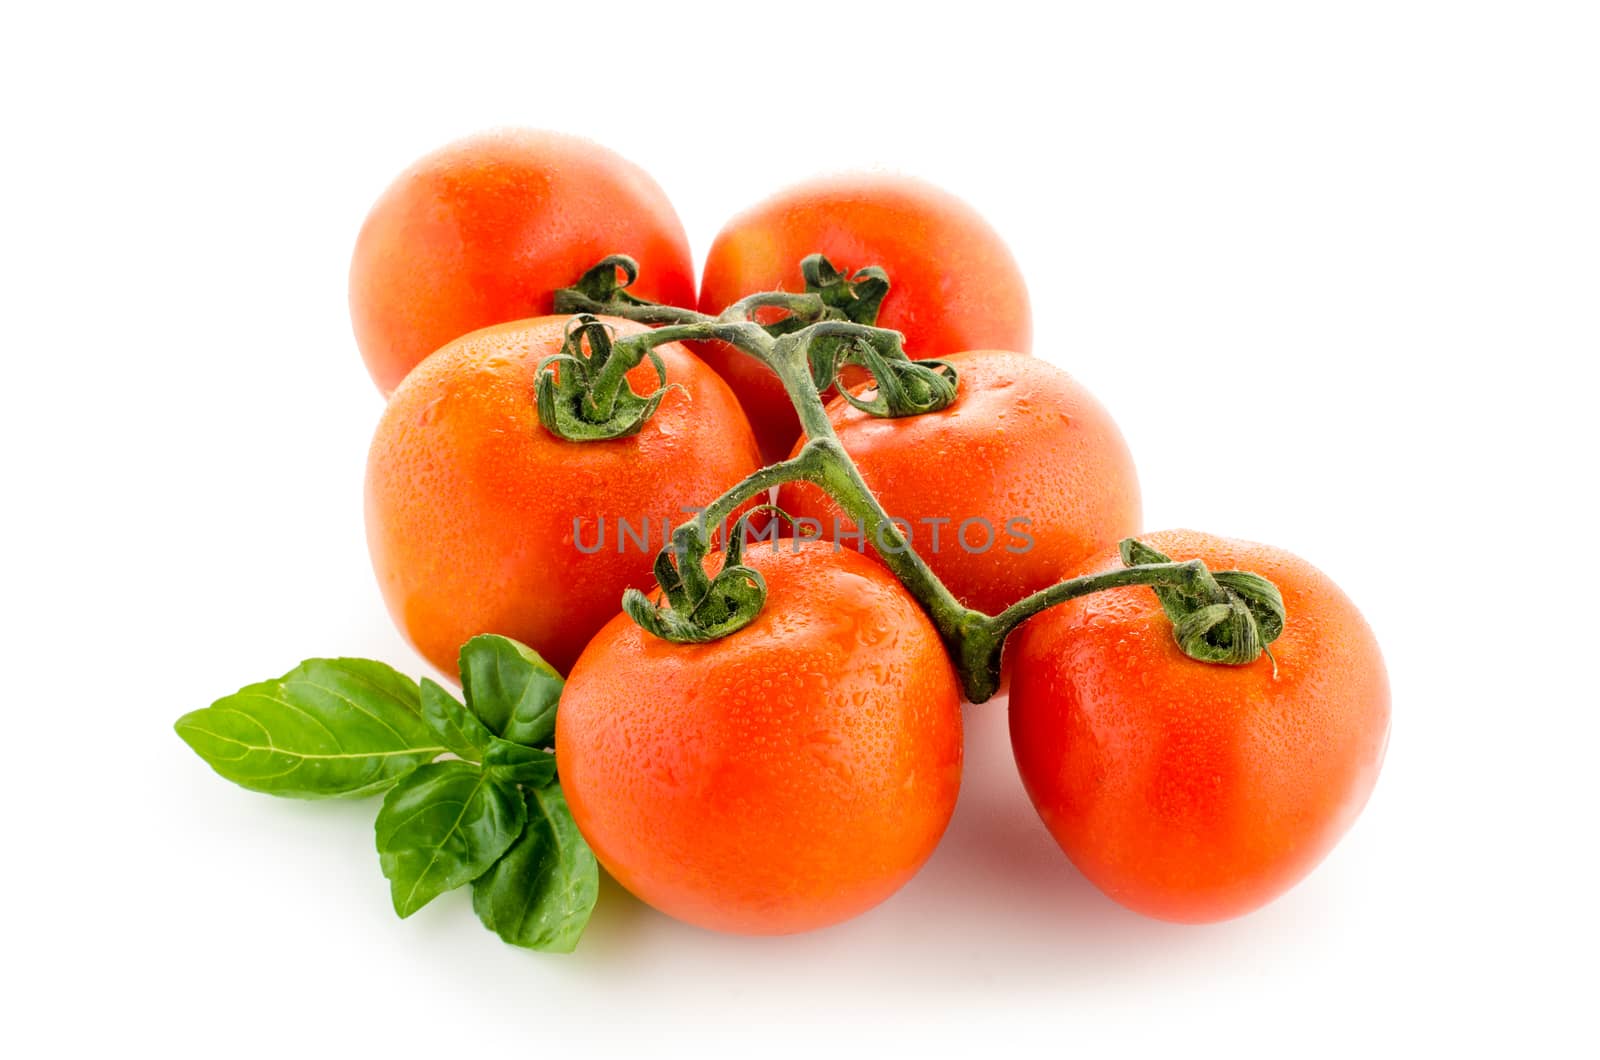 Agriculture: fresh ripe tomatoes, isolated on white background with basil leafs